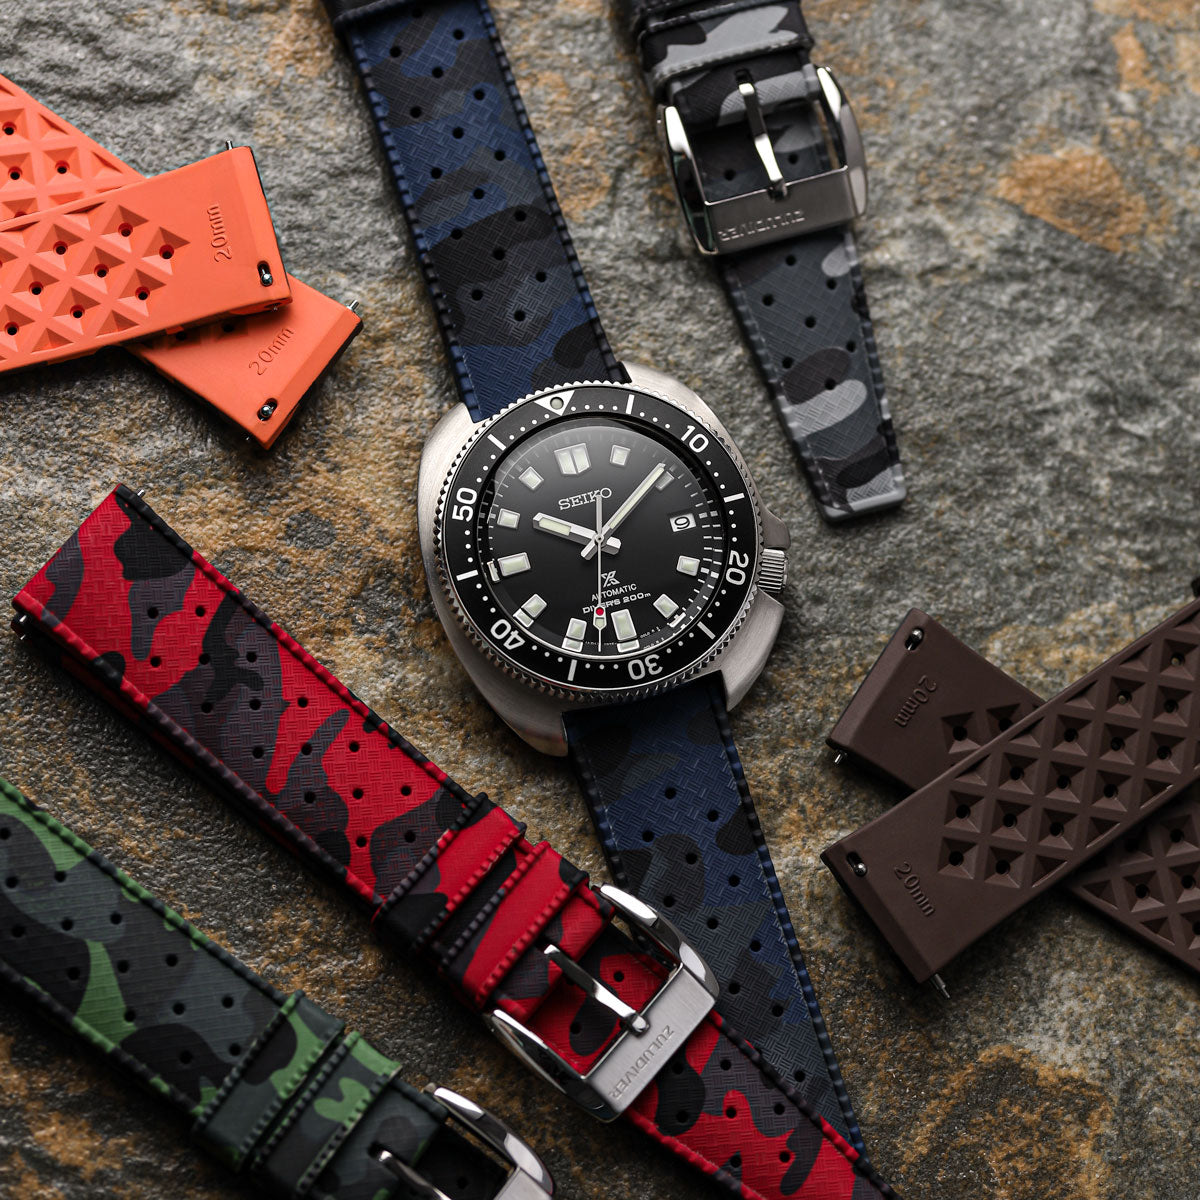 ZULUDIVER Tropical Style Camo Rubber Watch Strap - Grey - additional image 2